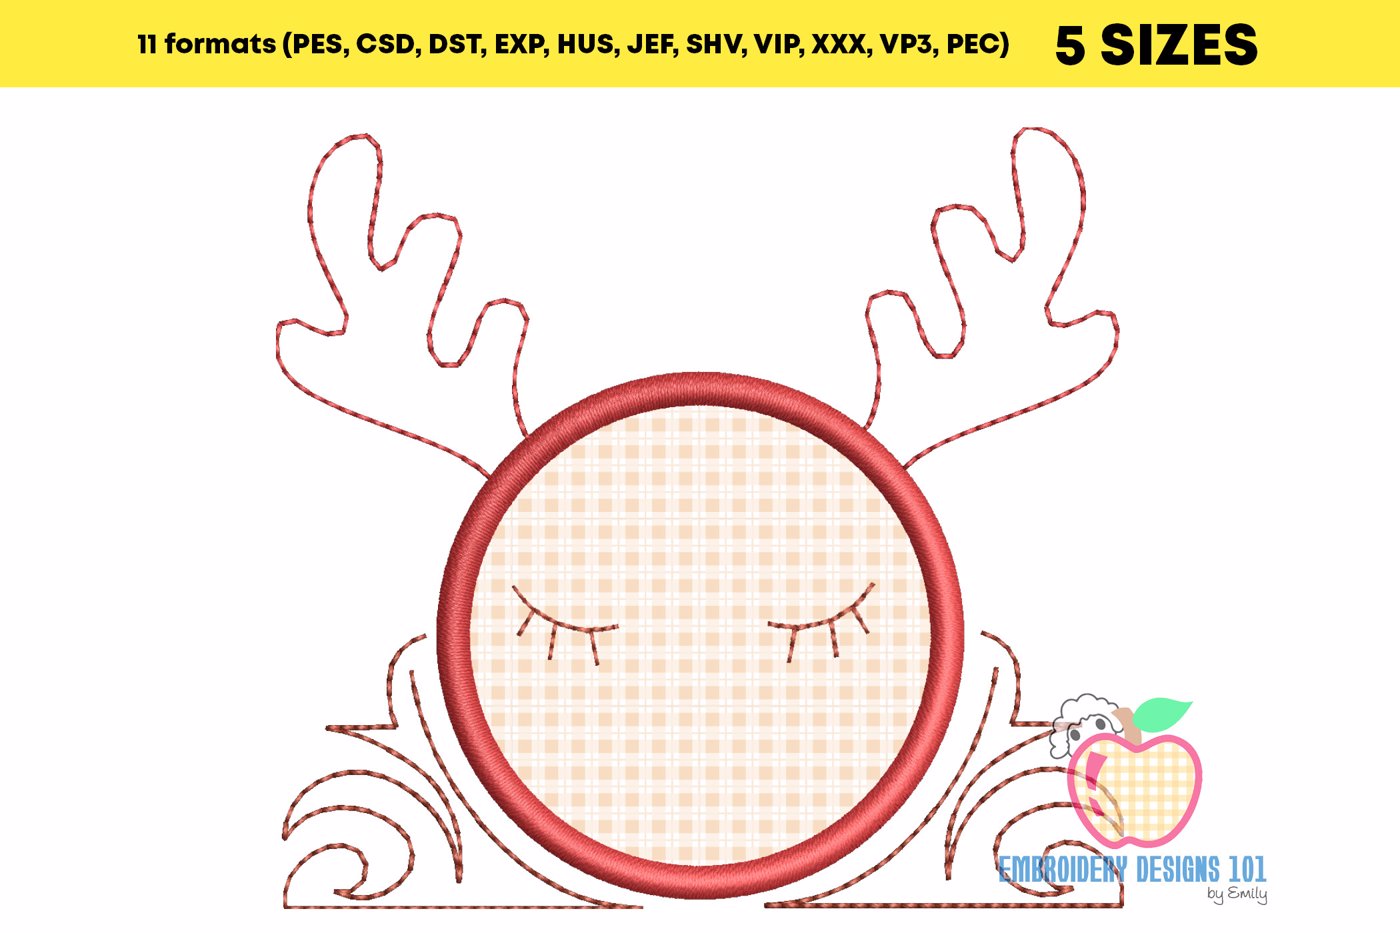 The Red Color Antlers Of The Reindeer Embroidery Design